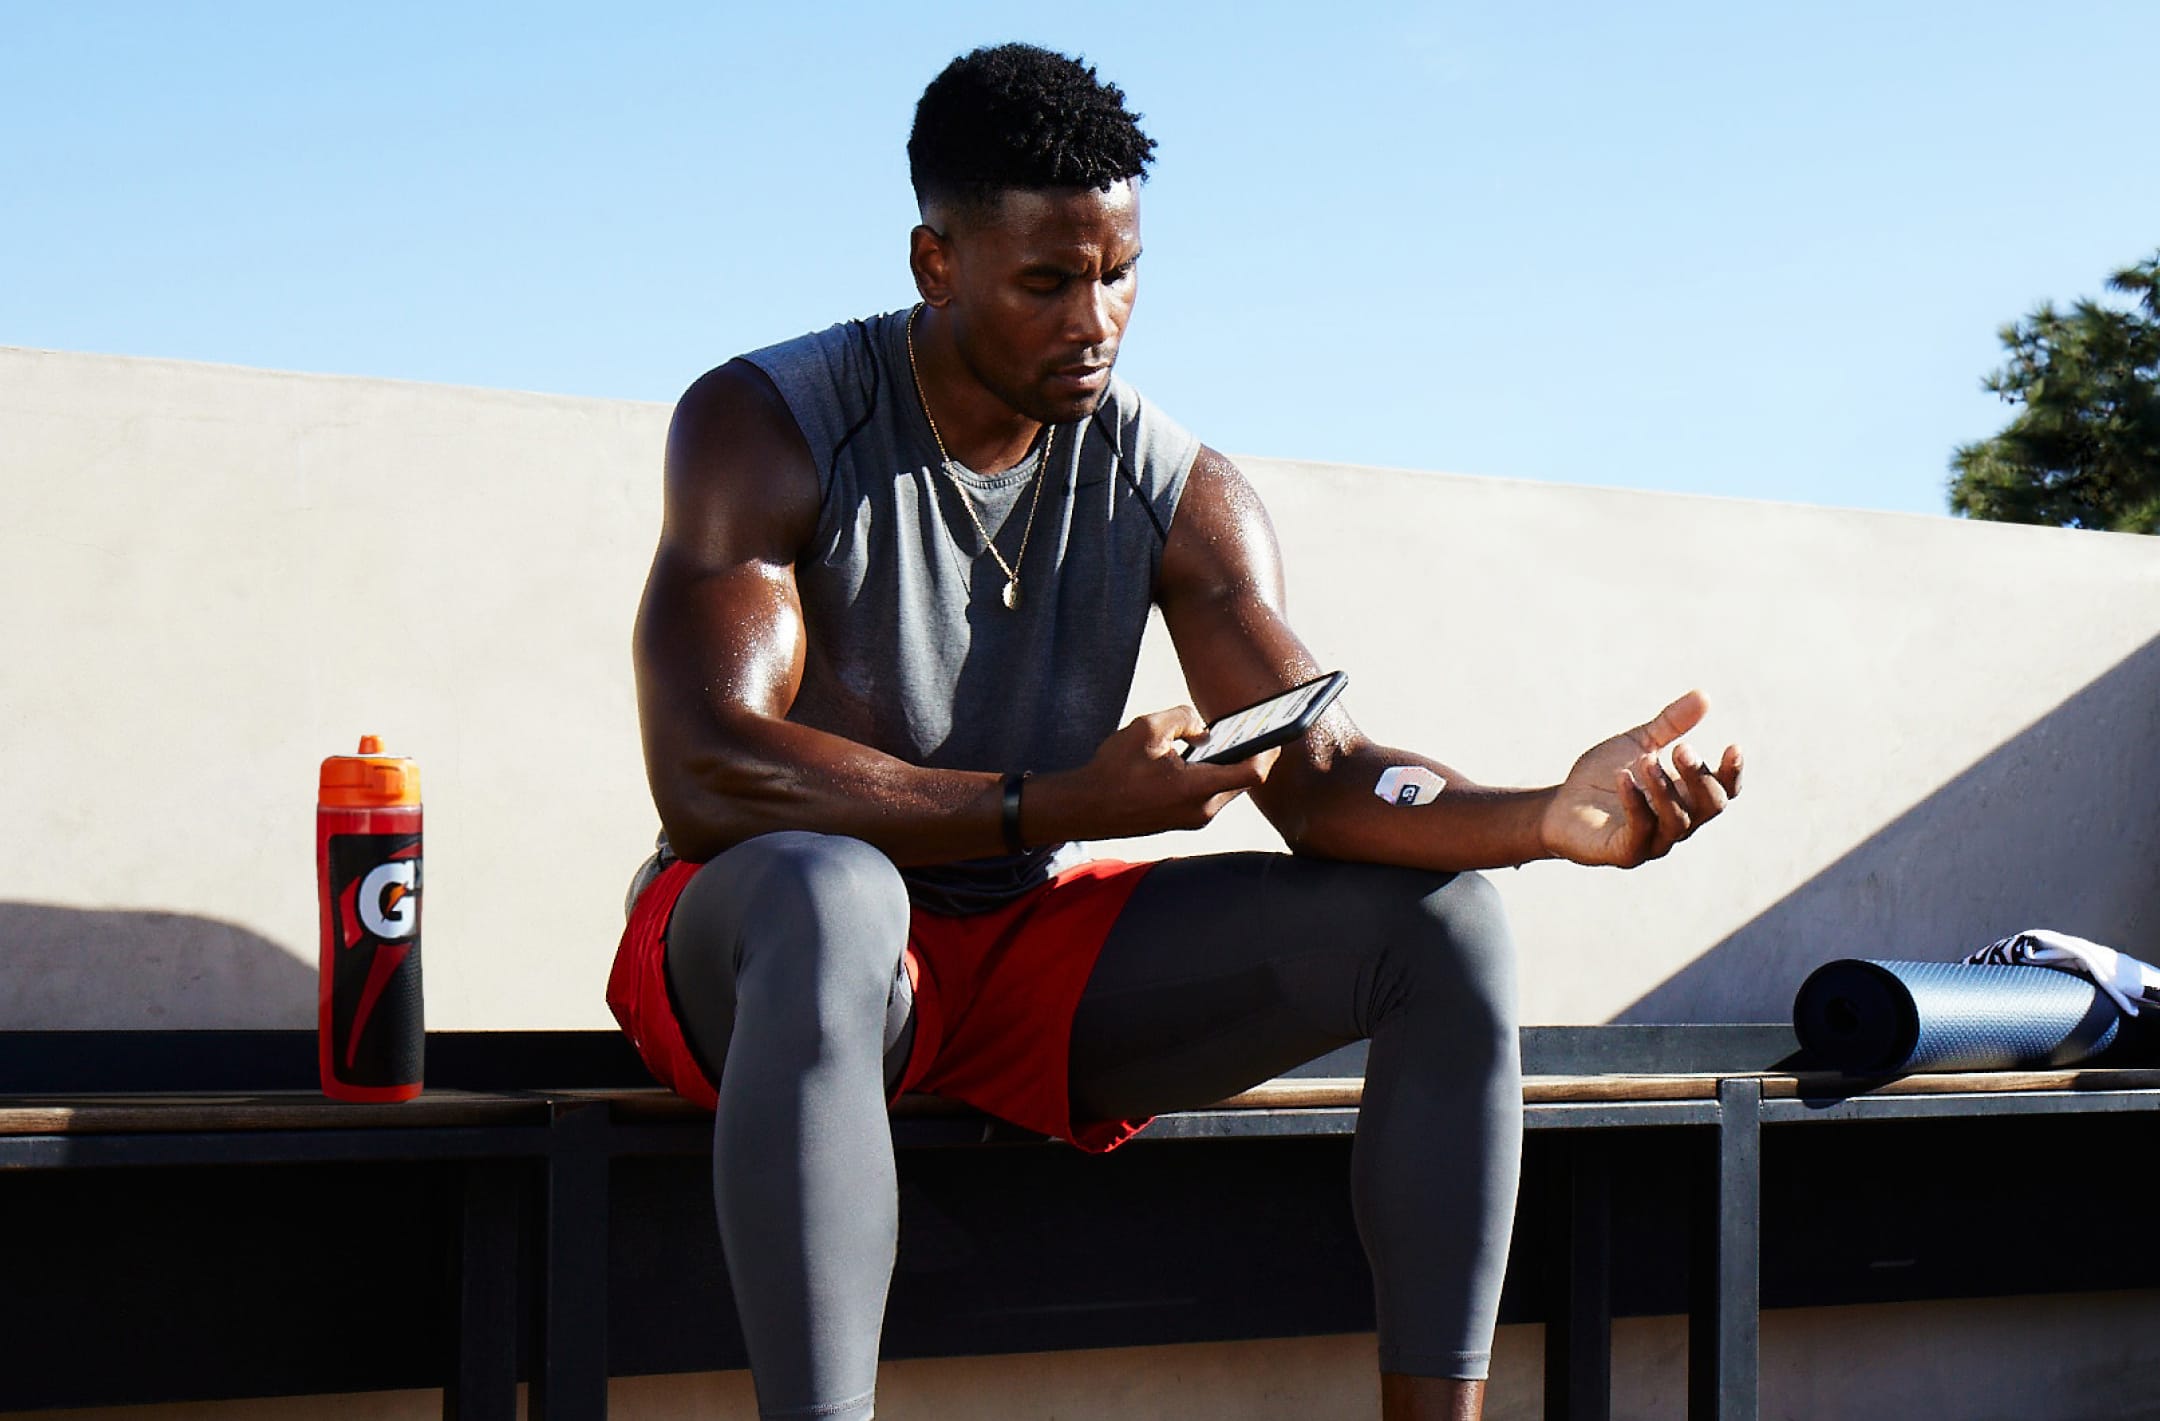 Gatorade launches Gx Sweat Patch that measures perspiration, hydration levels